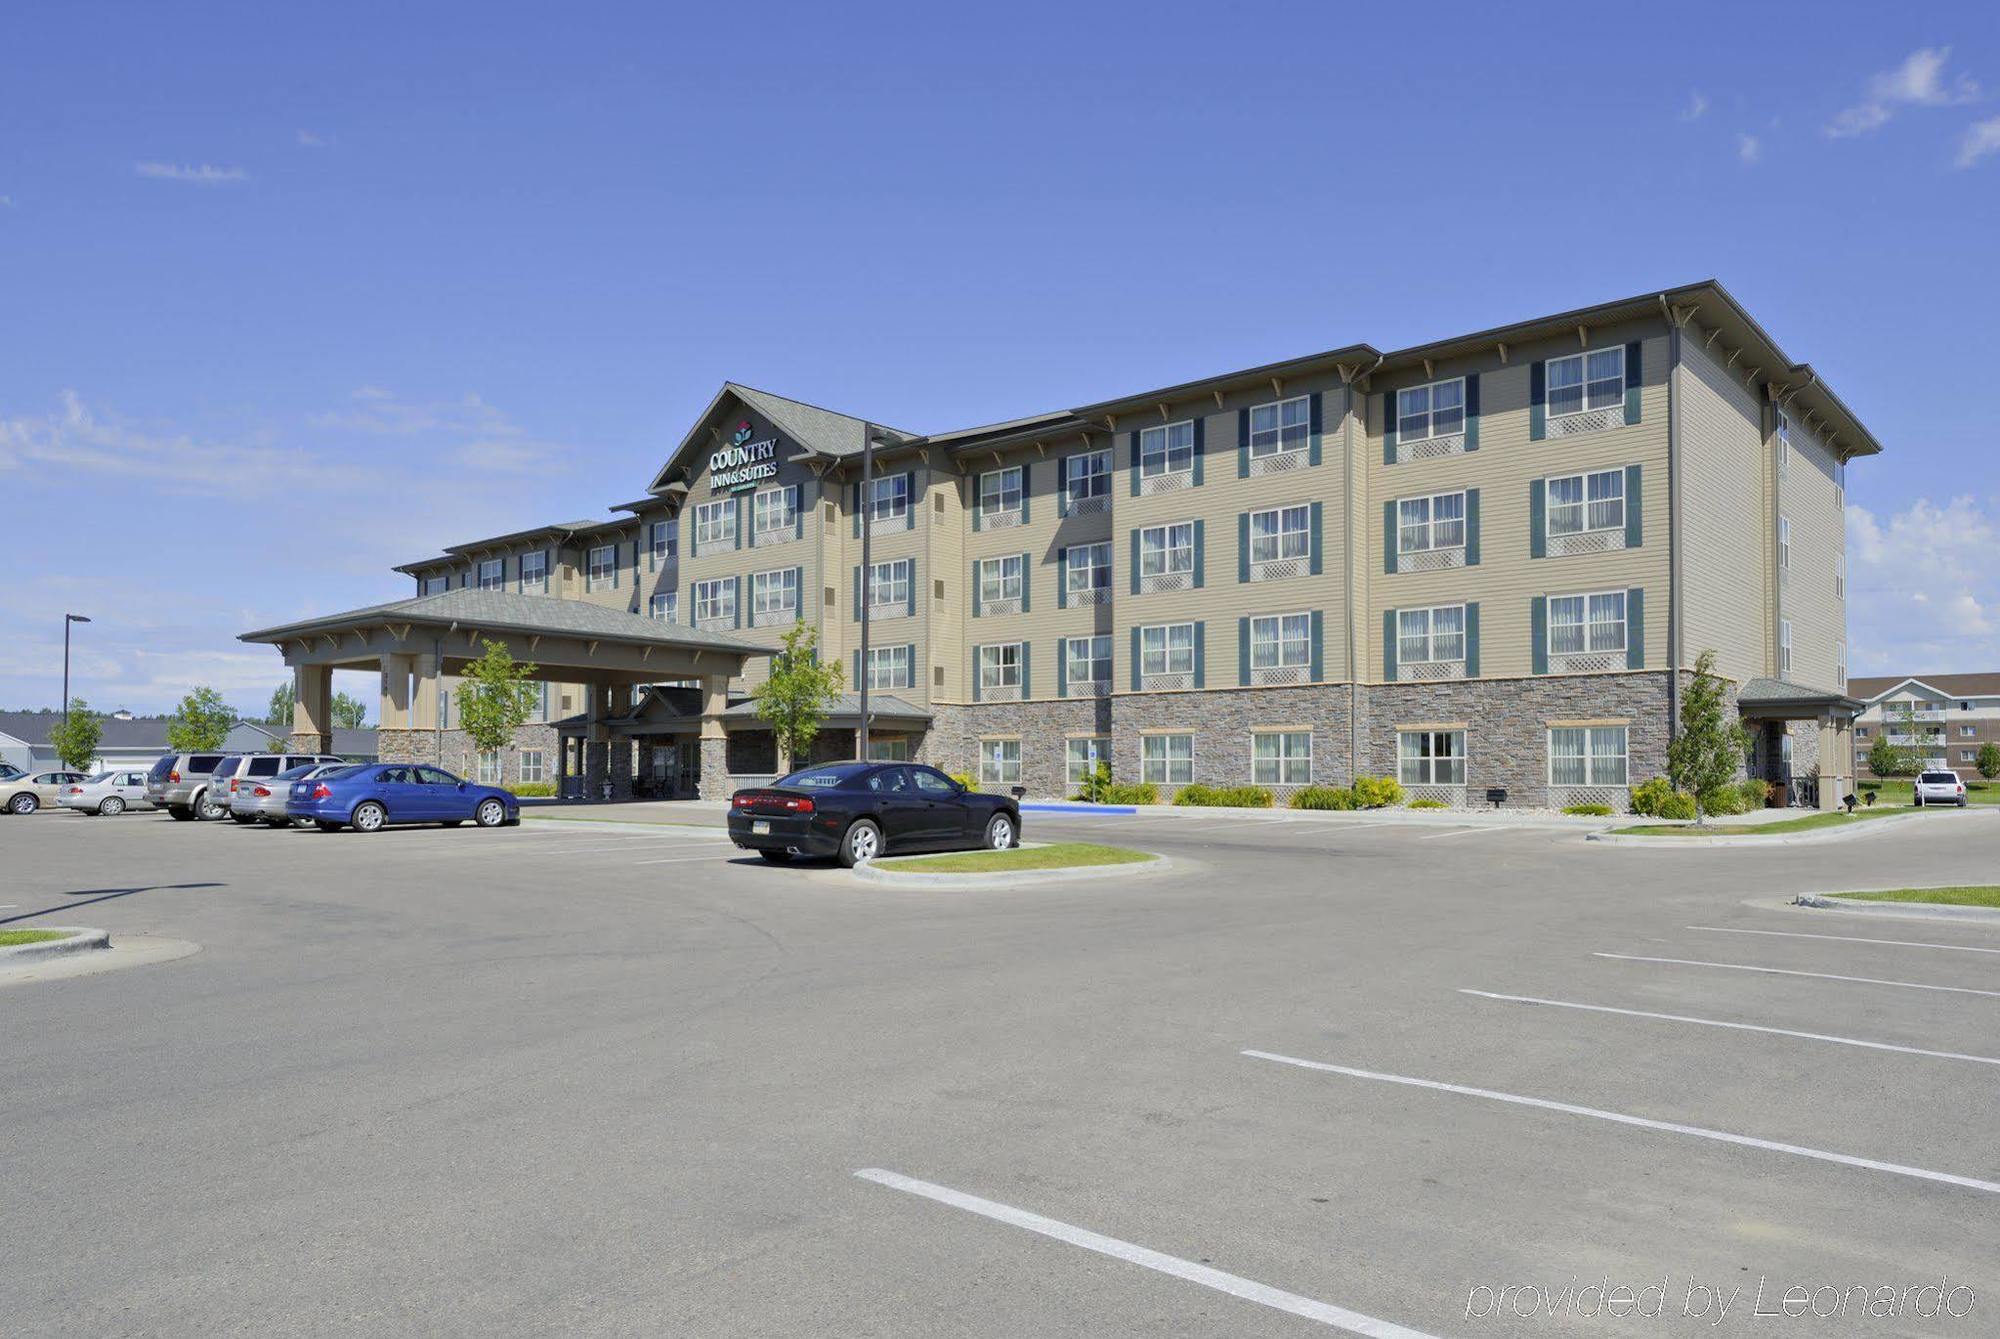 Country Inn & Suites By Radisson, Grand Forks, Nd ภายนอก รูปภาพ